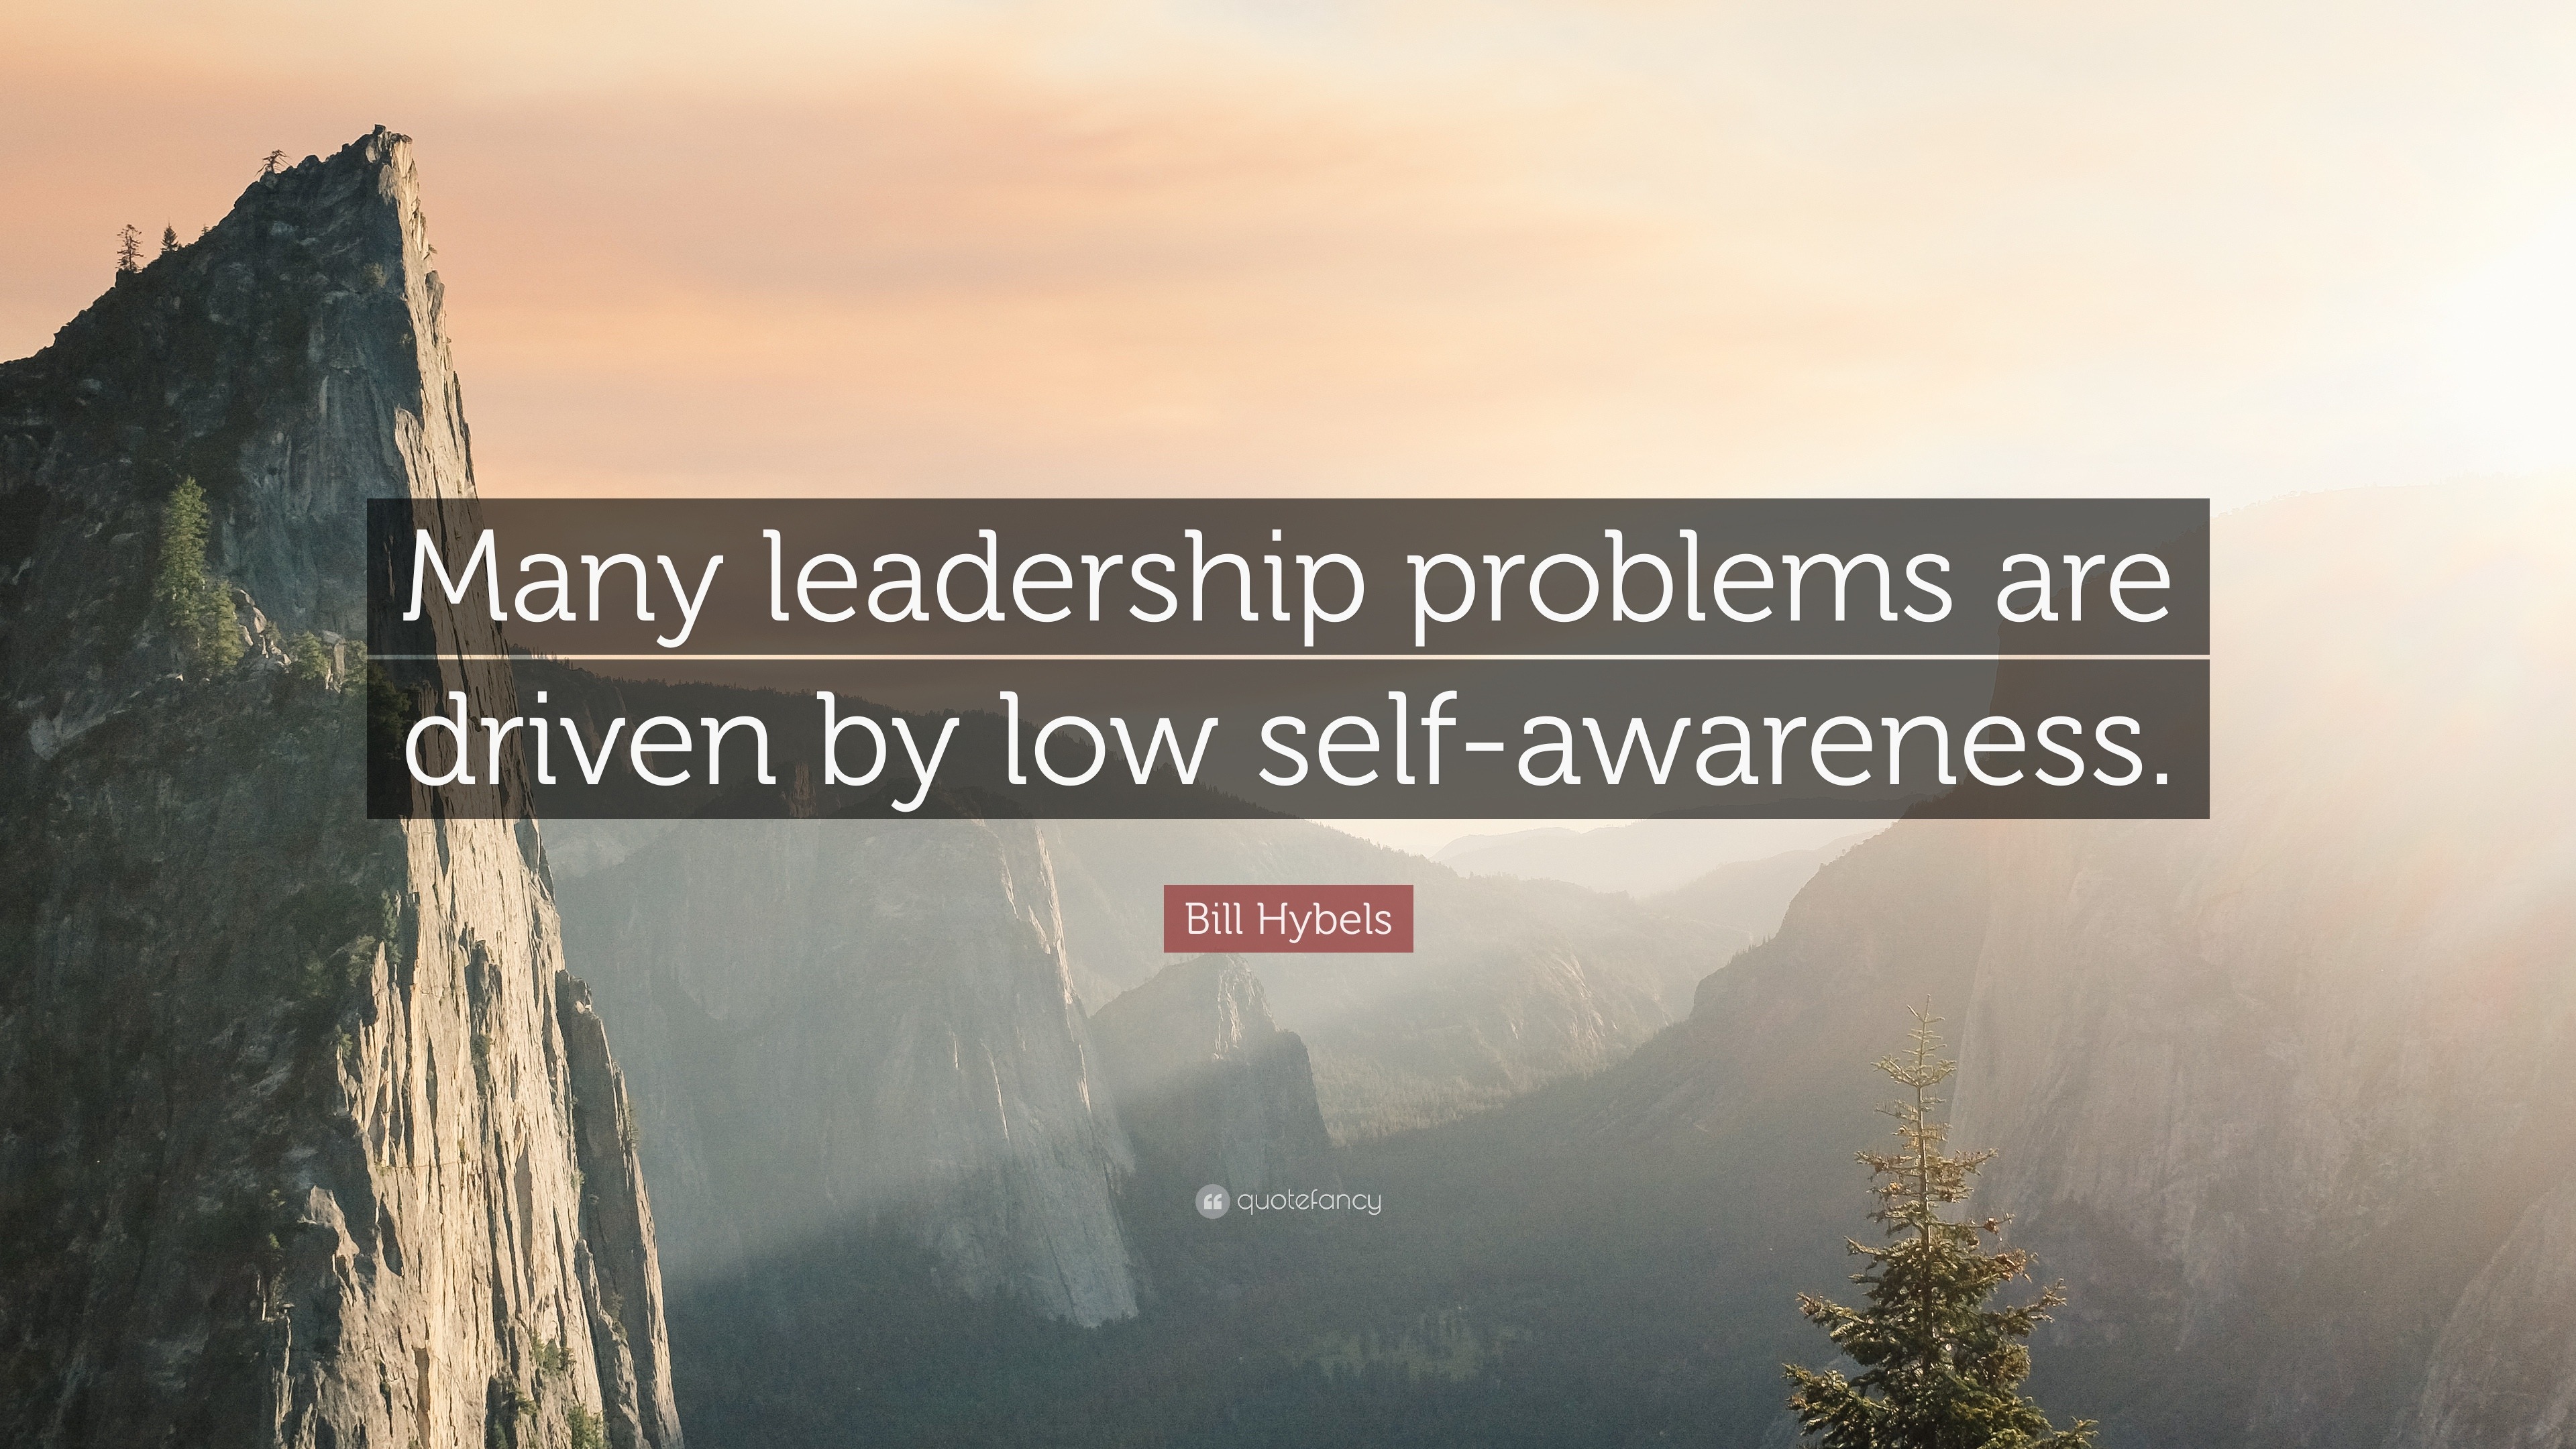 Bill Hybels Quote: “Many leadership problems are driven by low self